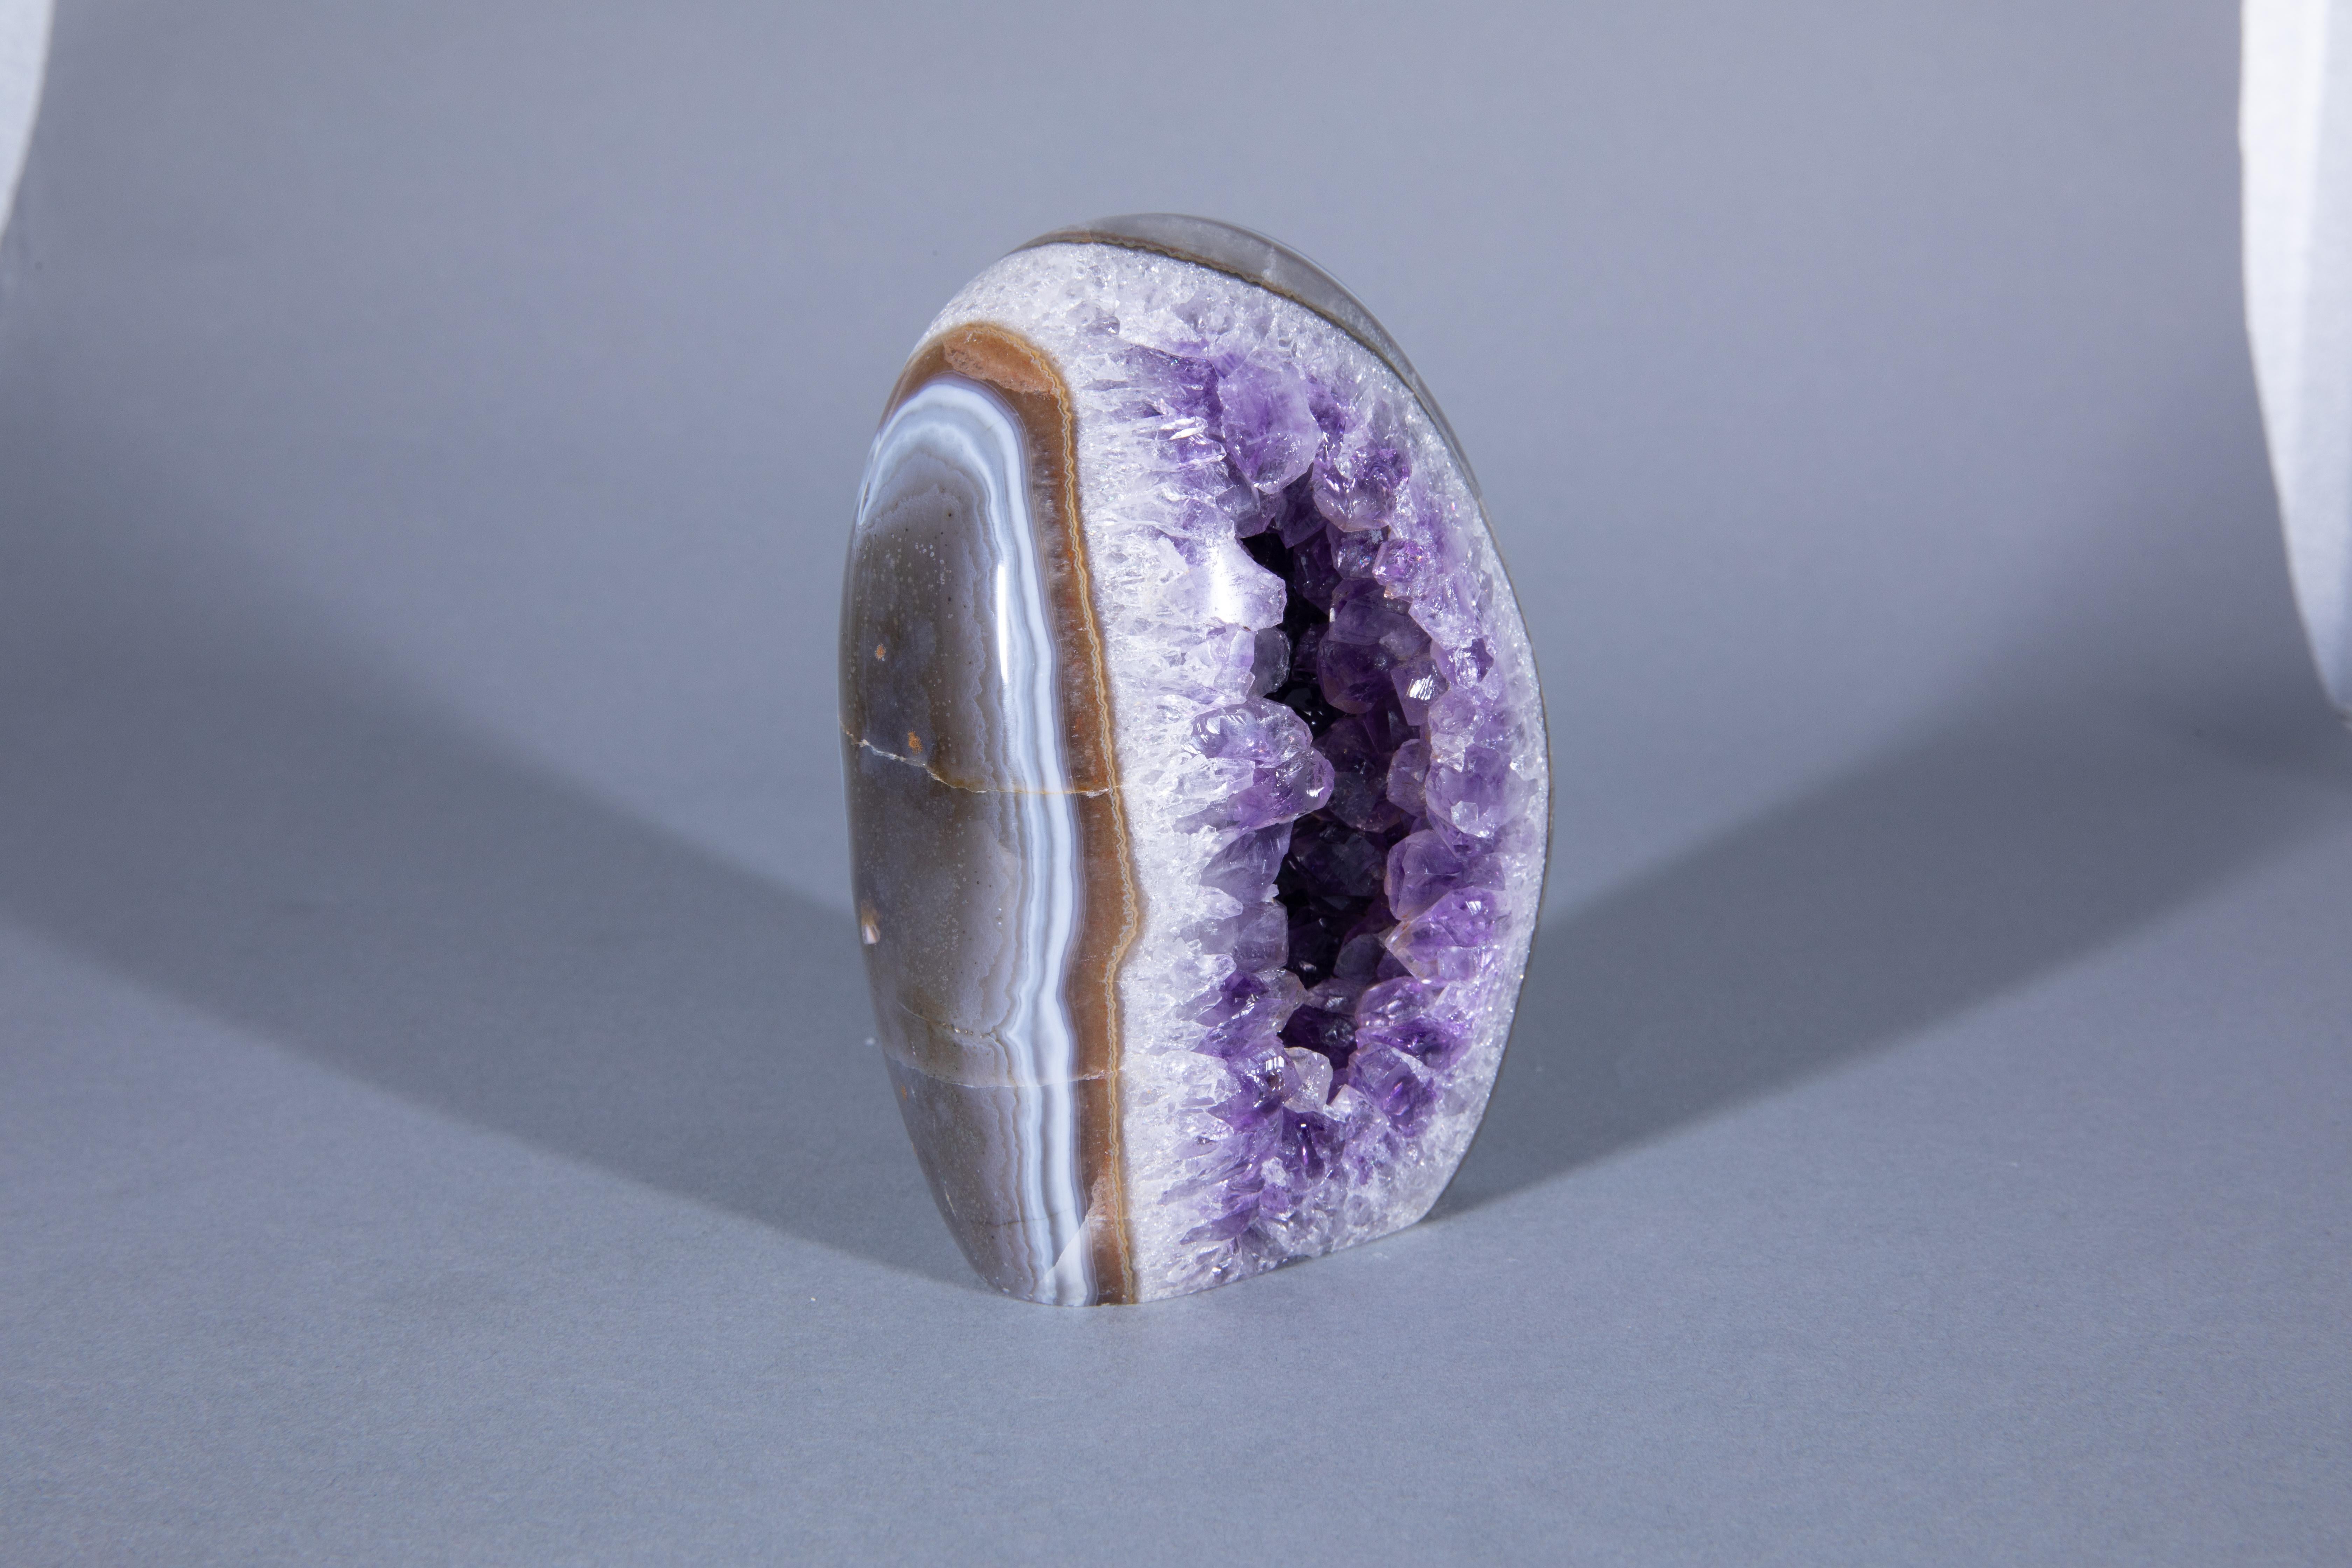 Uruguayan Polished Amethyst Egg Geode Surrounded by Agate and Quartz For Sale